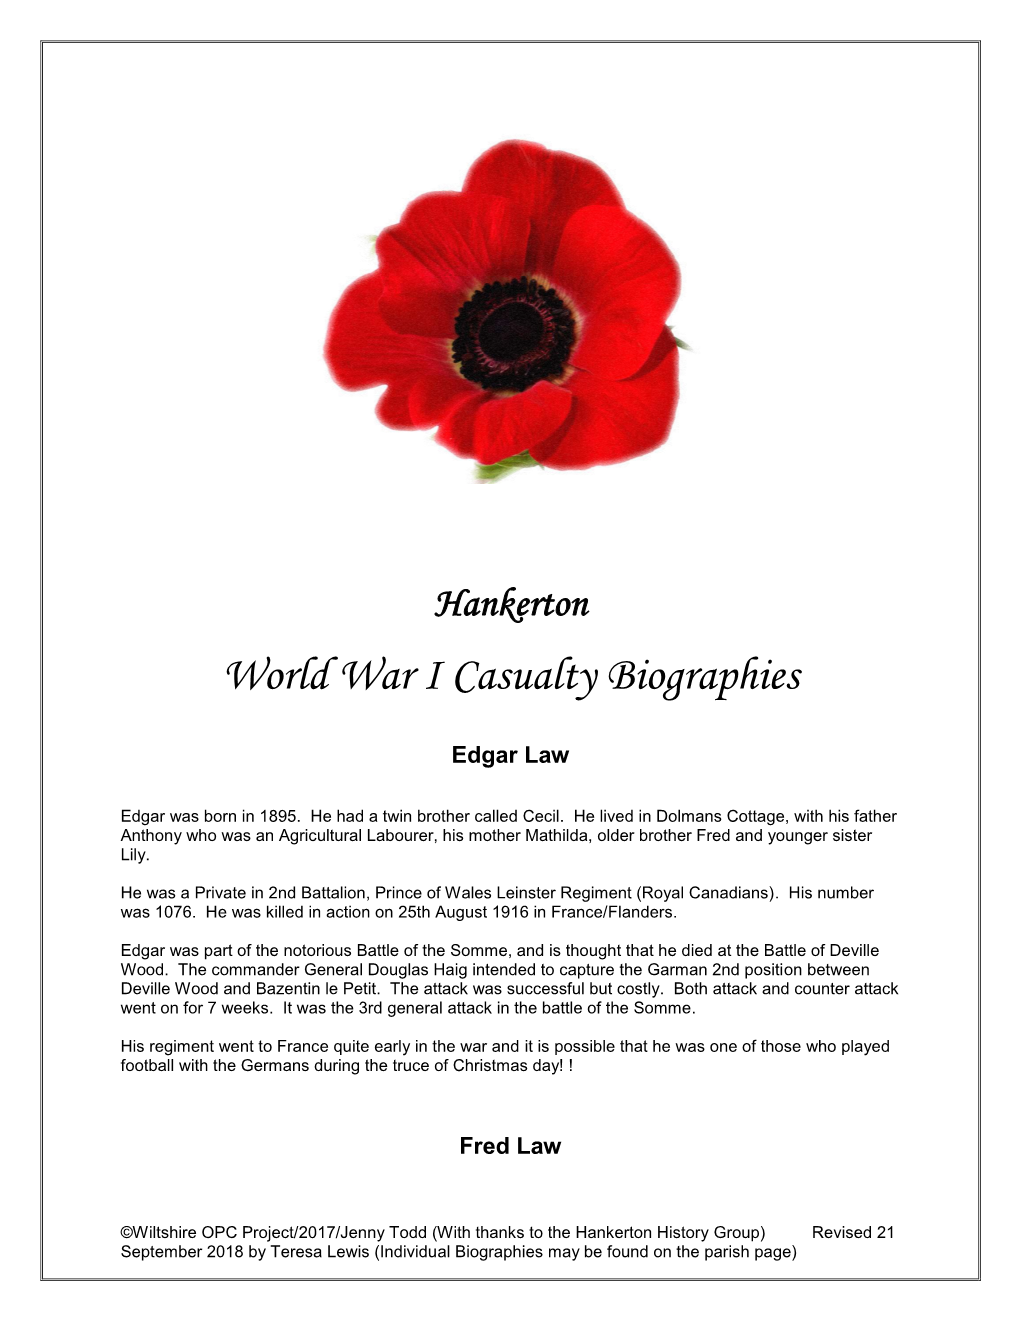 World War I Casualty Biographies